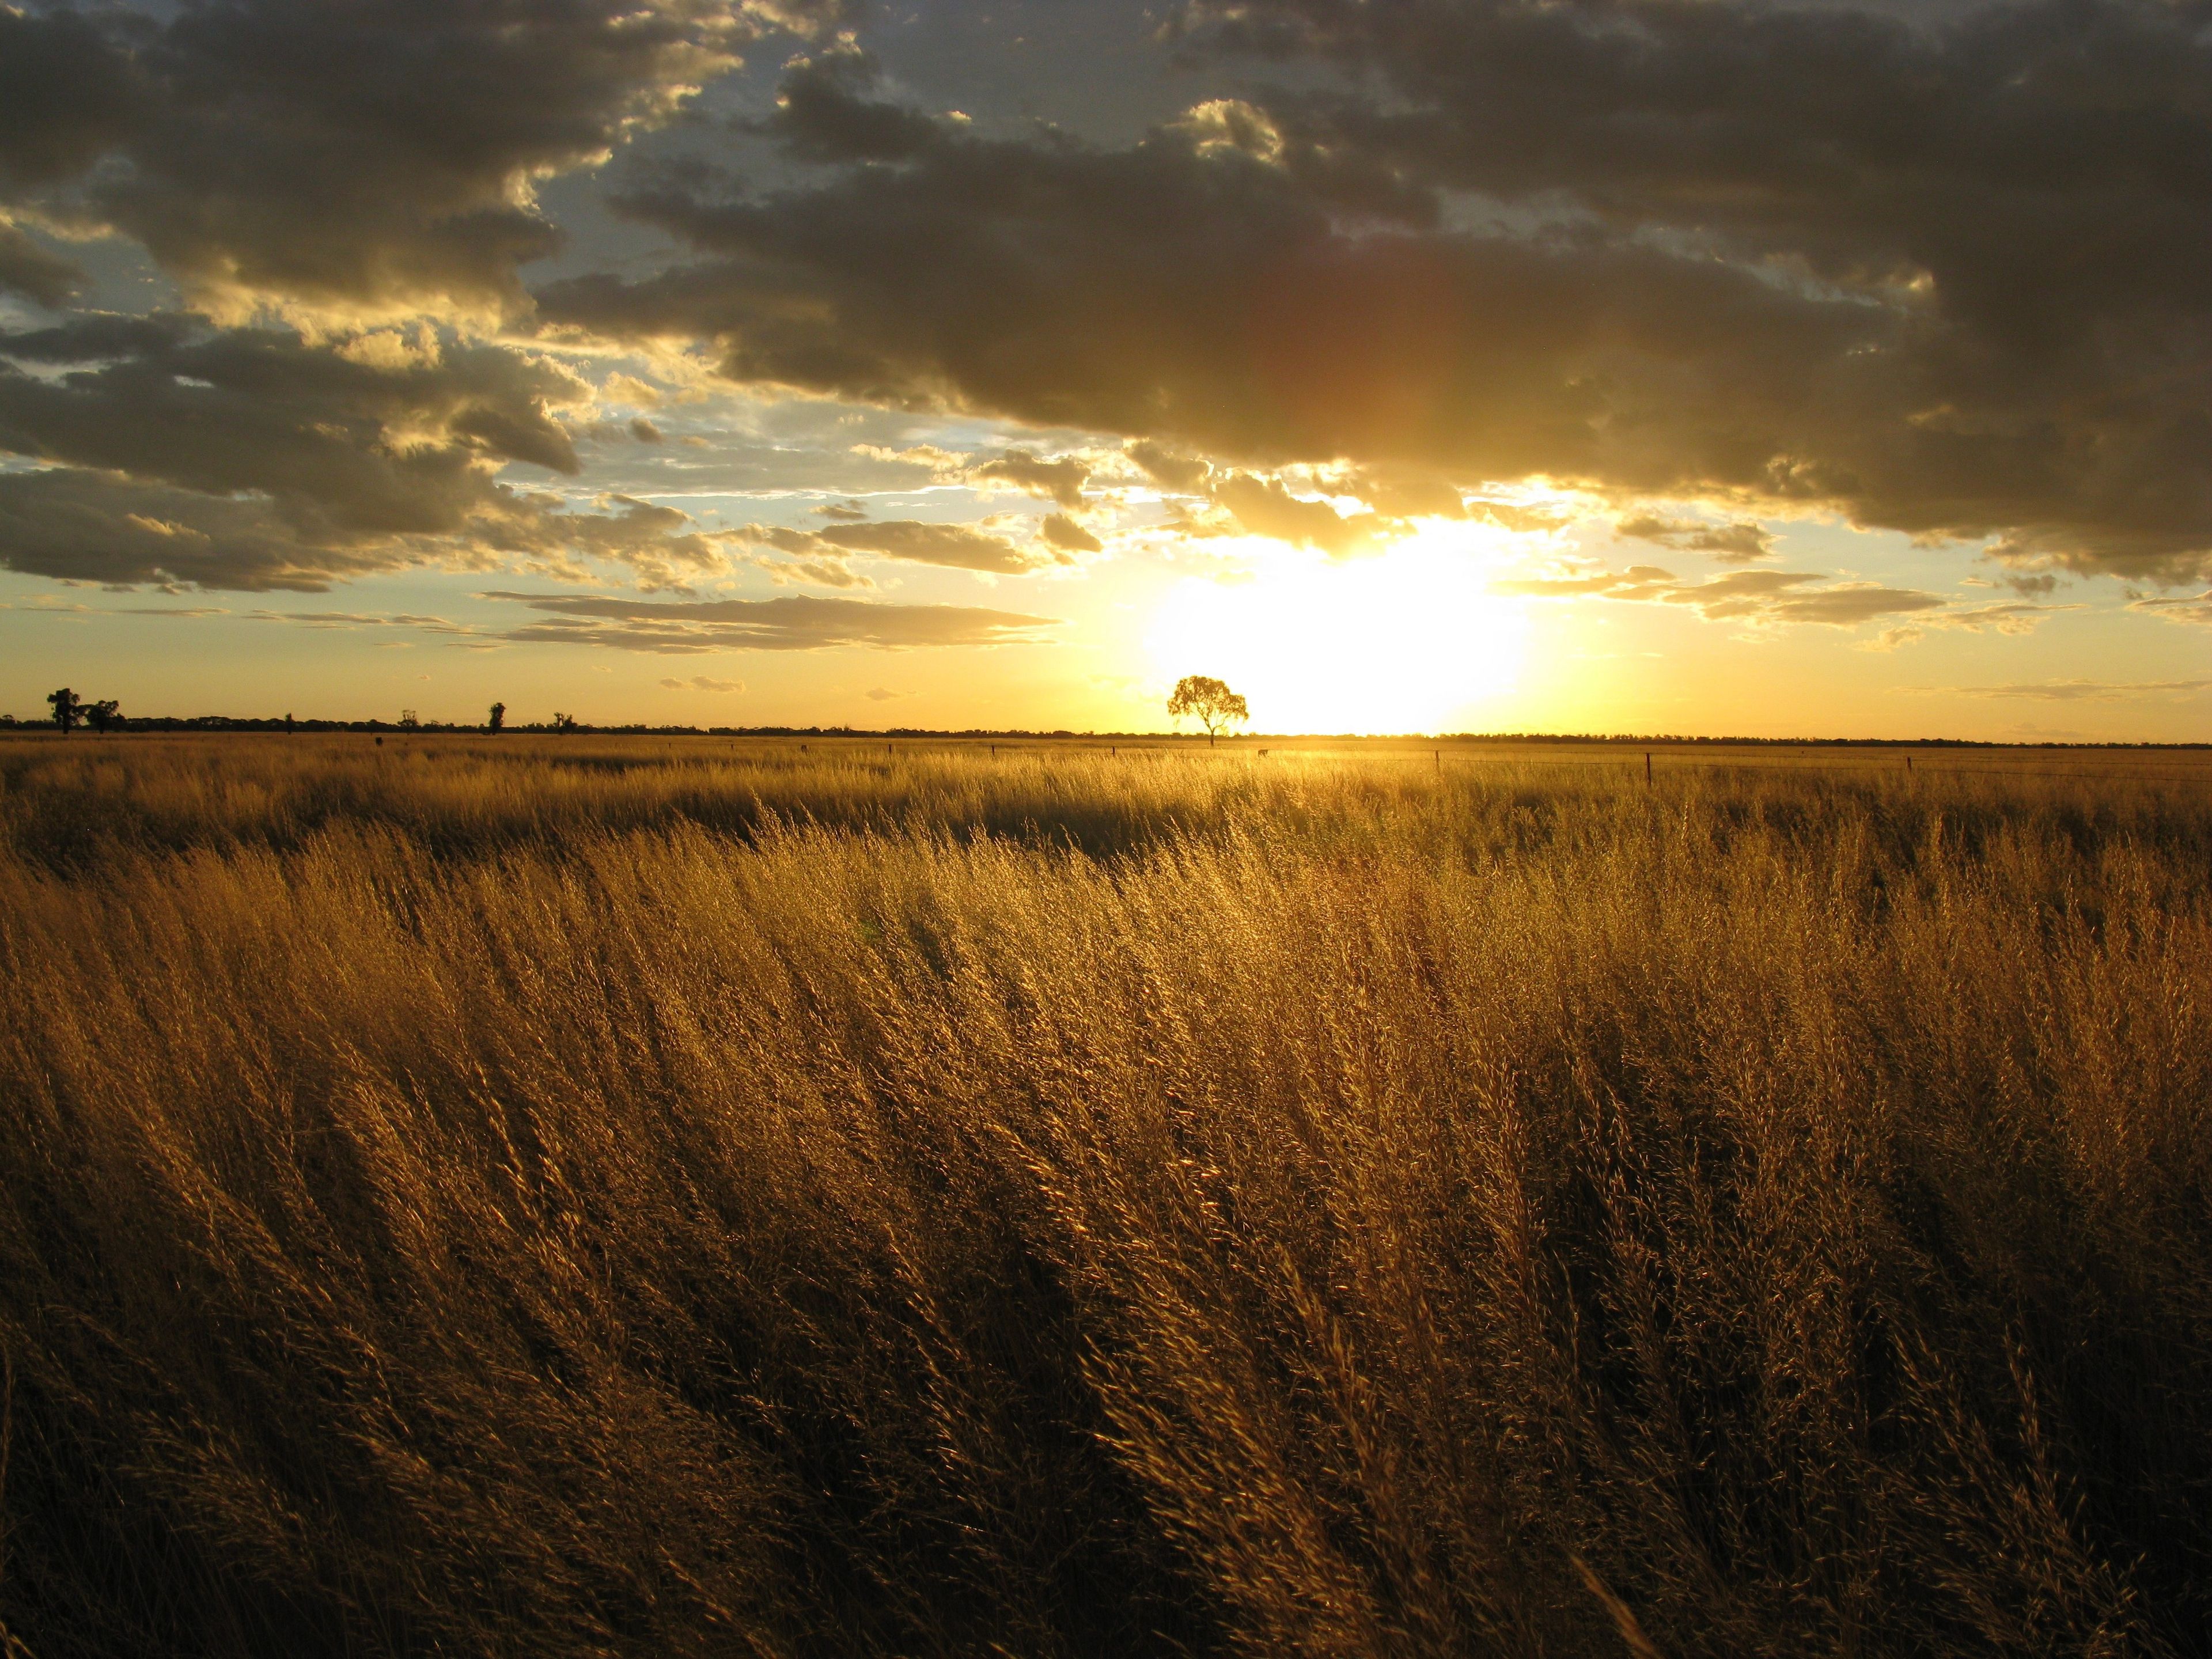 The sun sets over a large field with minimal trees in Australia.